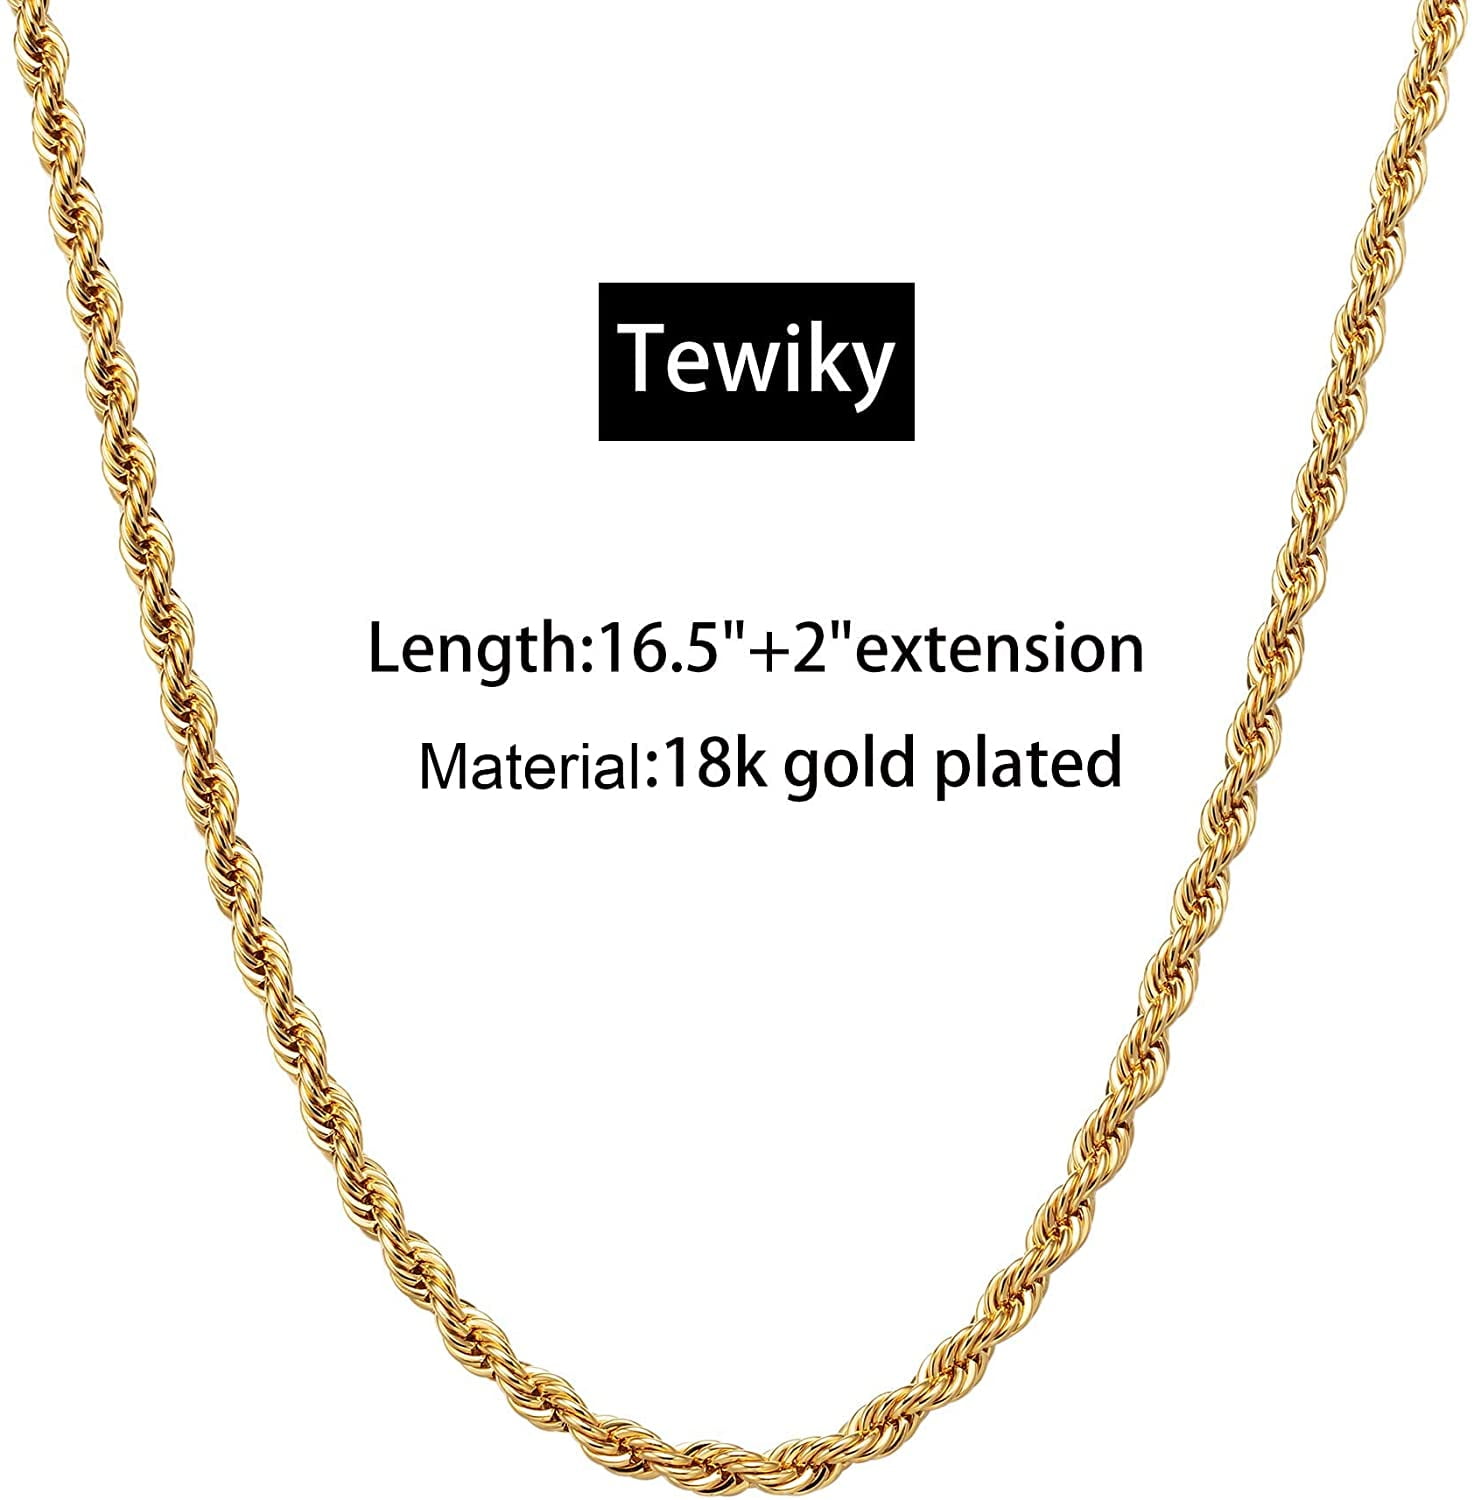 18K Gold Plated Herringbone Chain Necklace For Men Punk Hip Hop Jewelry  With 10mm Size, 24 Chains From Mmjyt, $35.71 | DHgate.Com